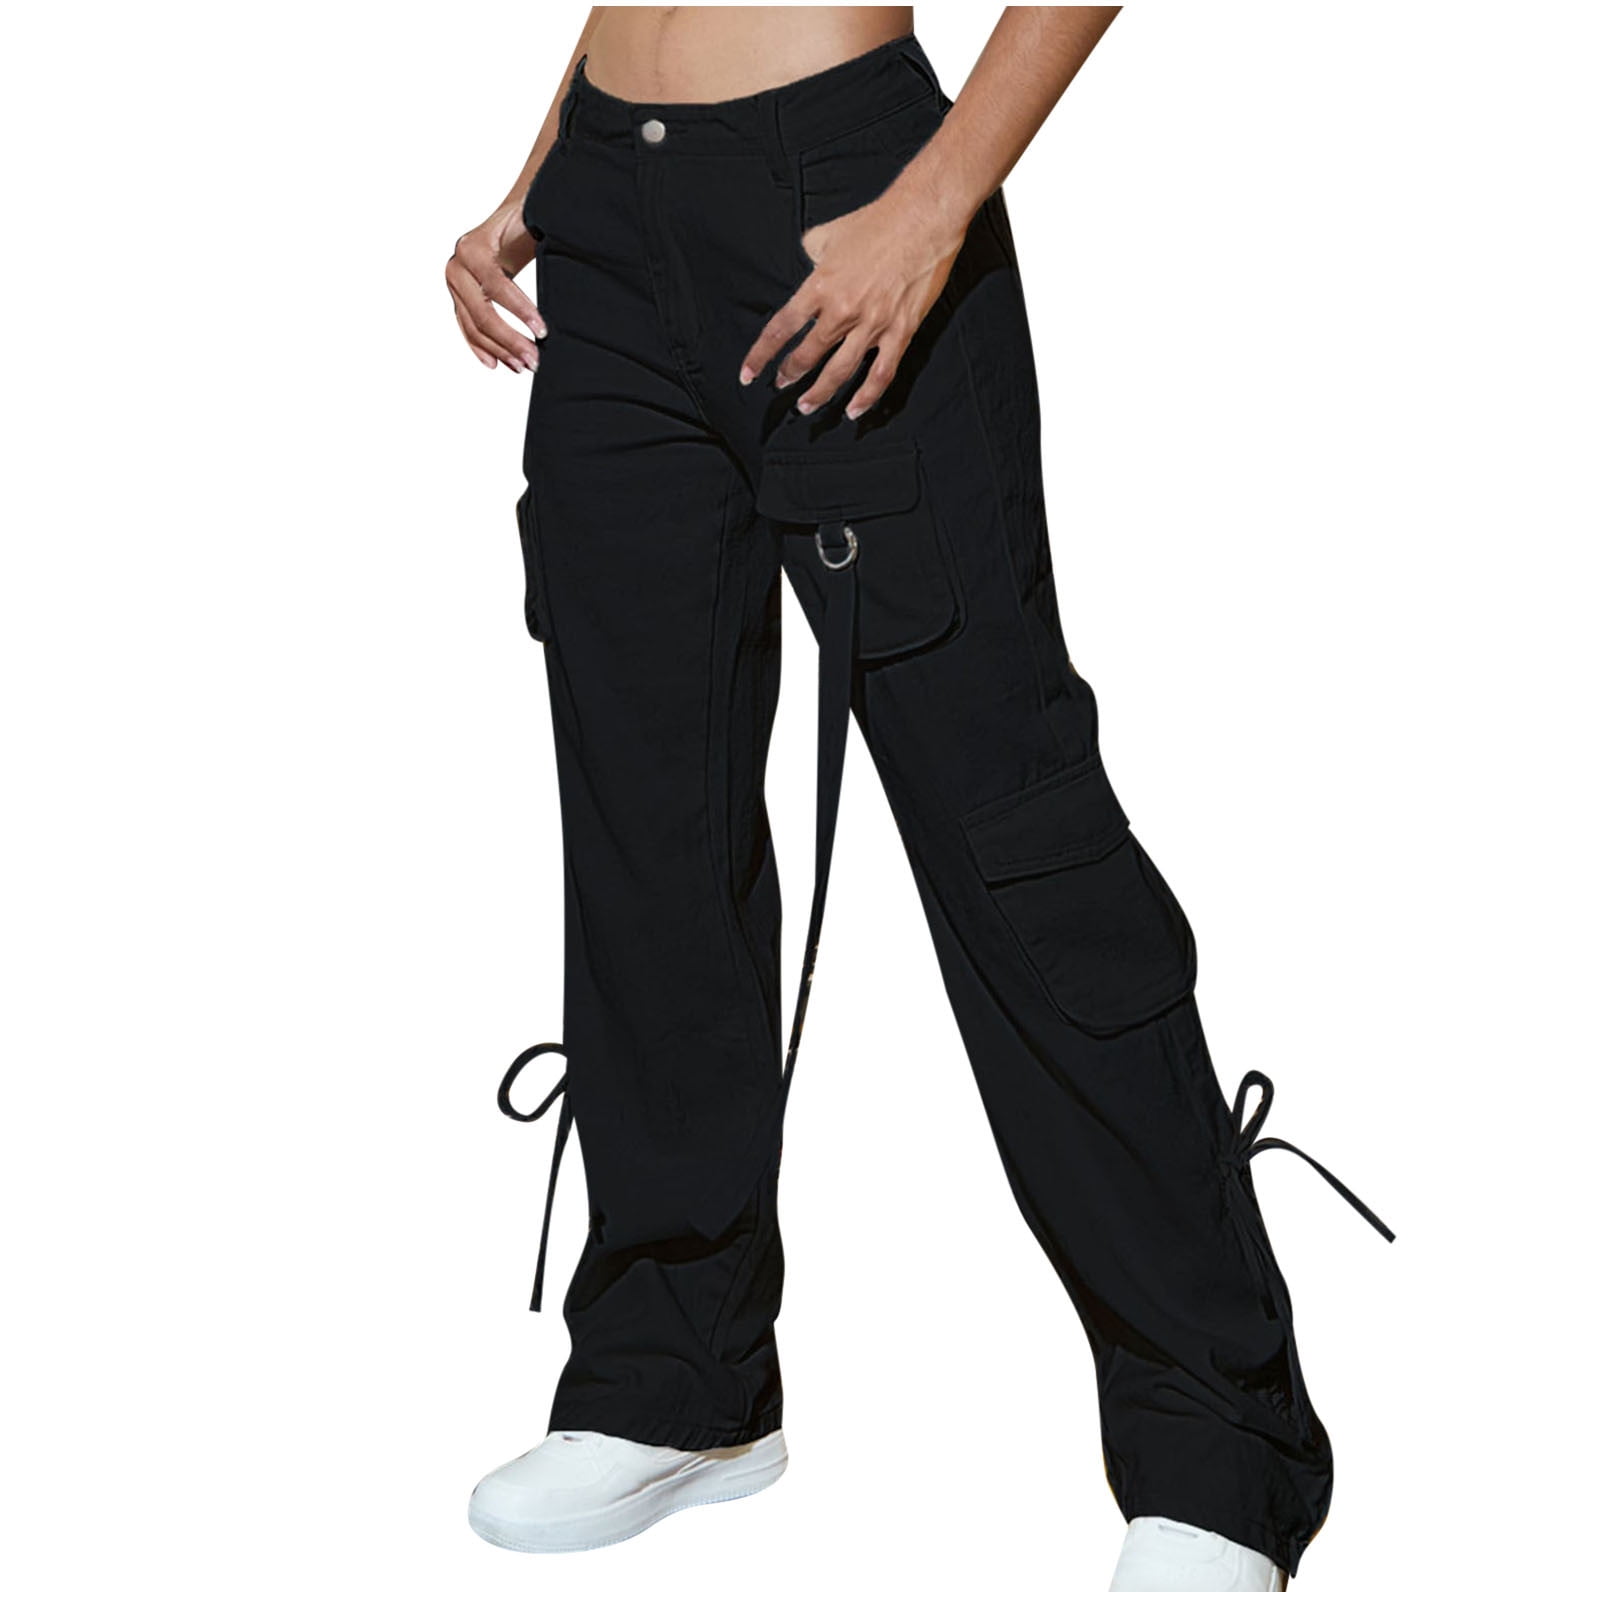 Zella Pants Womens 4 Gray Flared Flare Sweats Athletic Workout Gym